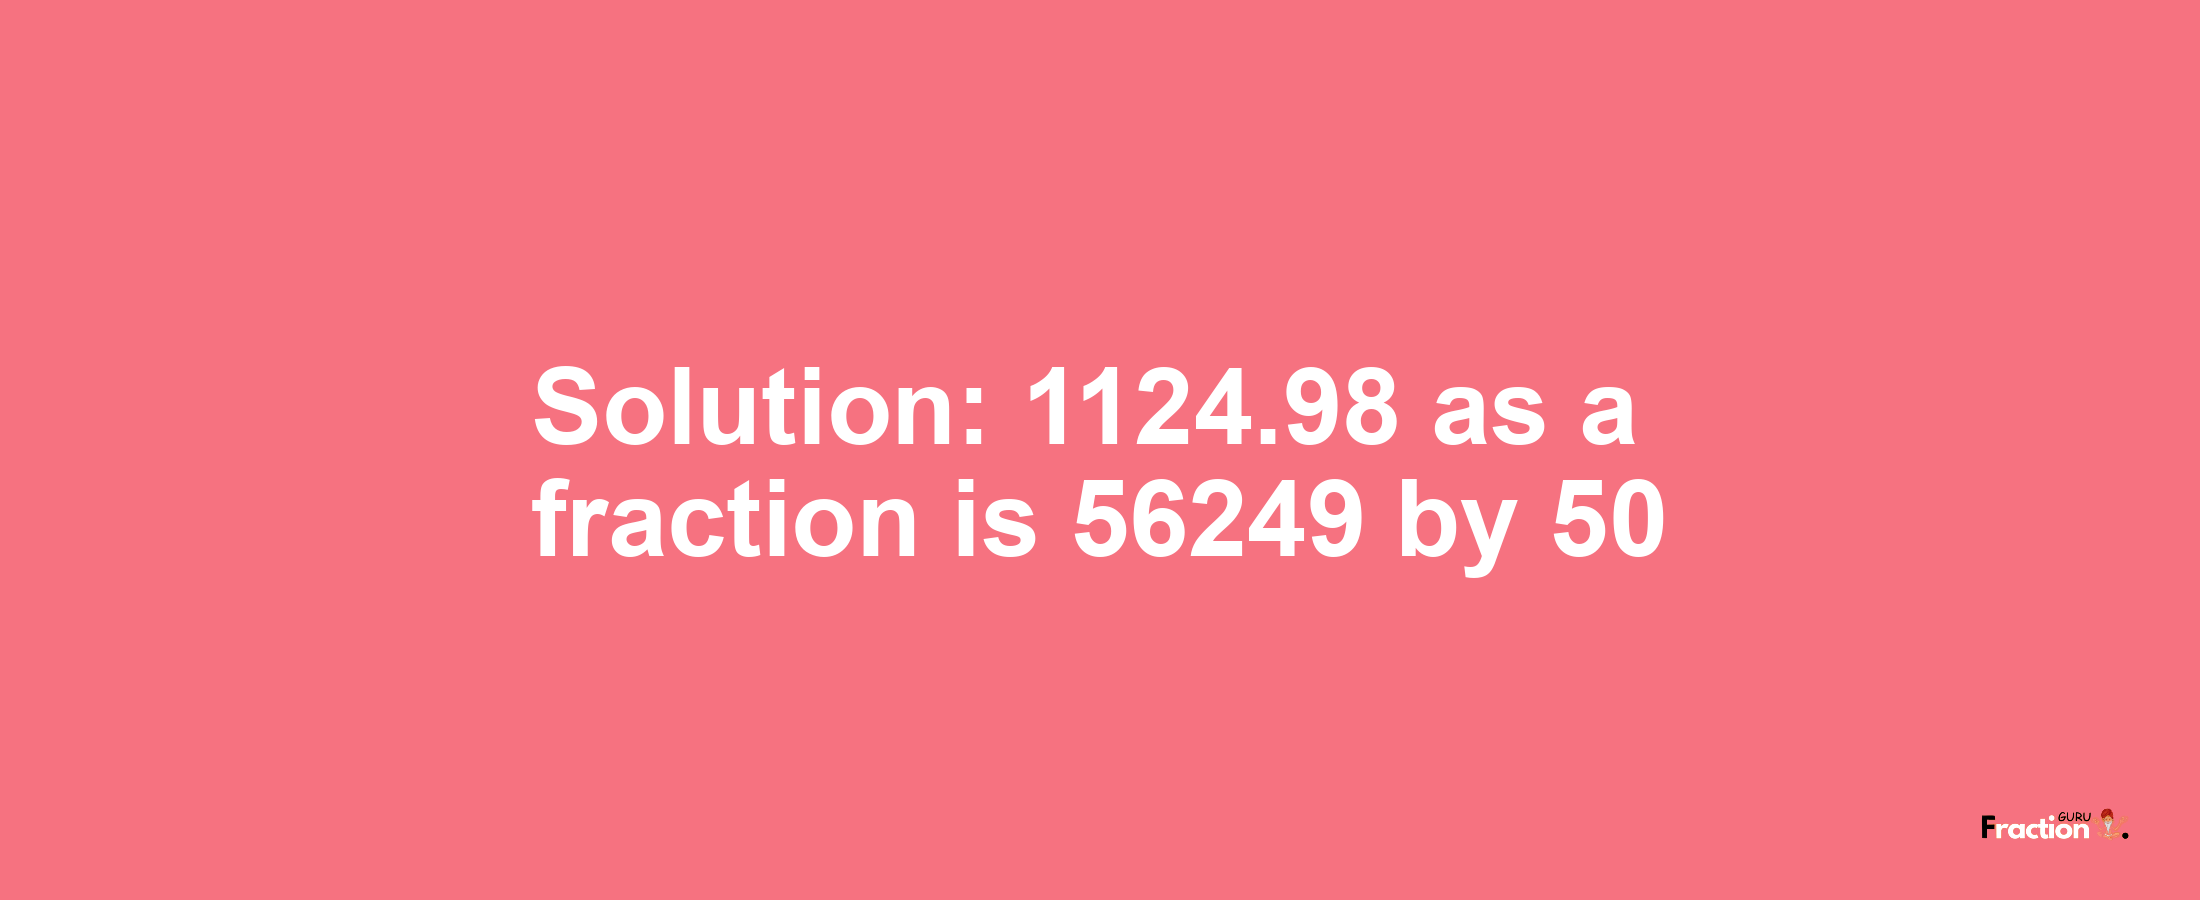 Solution:1124.98 as a fraction is 56249/50